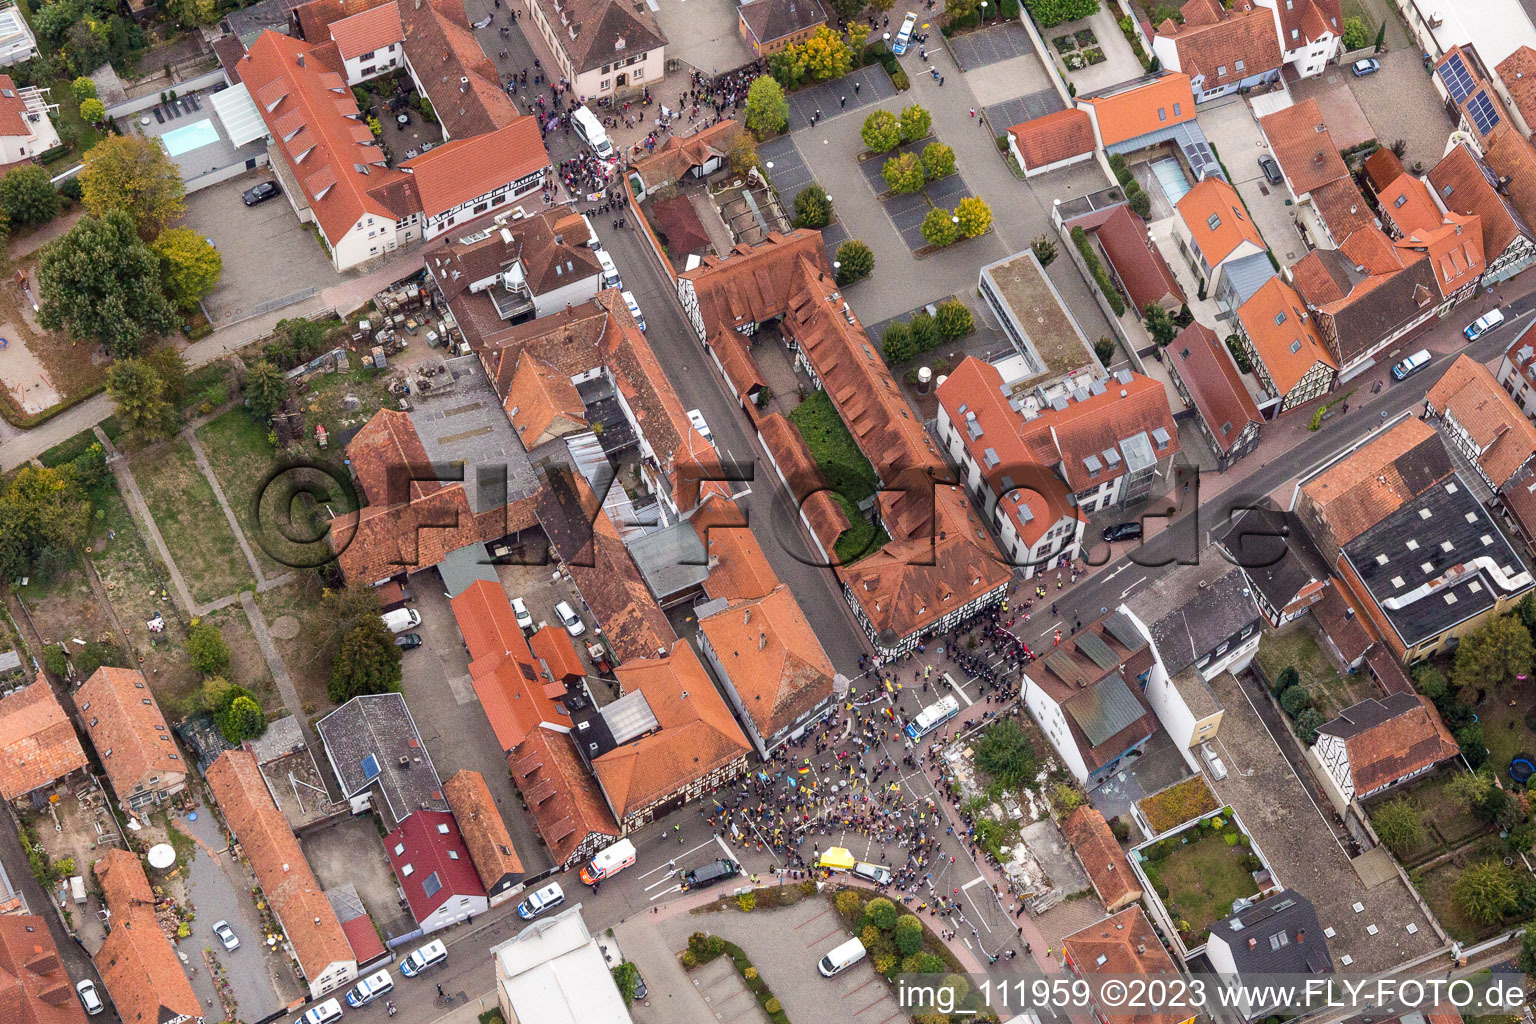 Aerial view of Demo “Women’s Alliance Kandel” vs. “AntiFa/We are Kandel/Grandmas against the right in Kandel in the state Rhineland-Palatinate, Germany